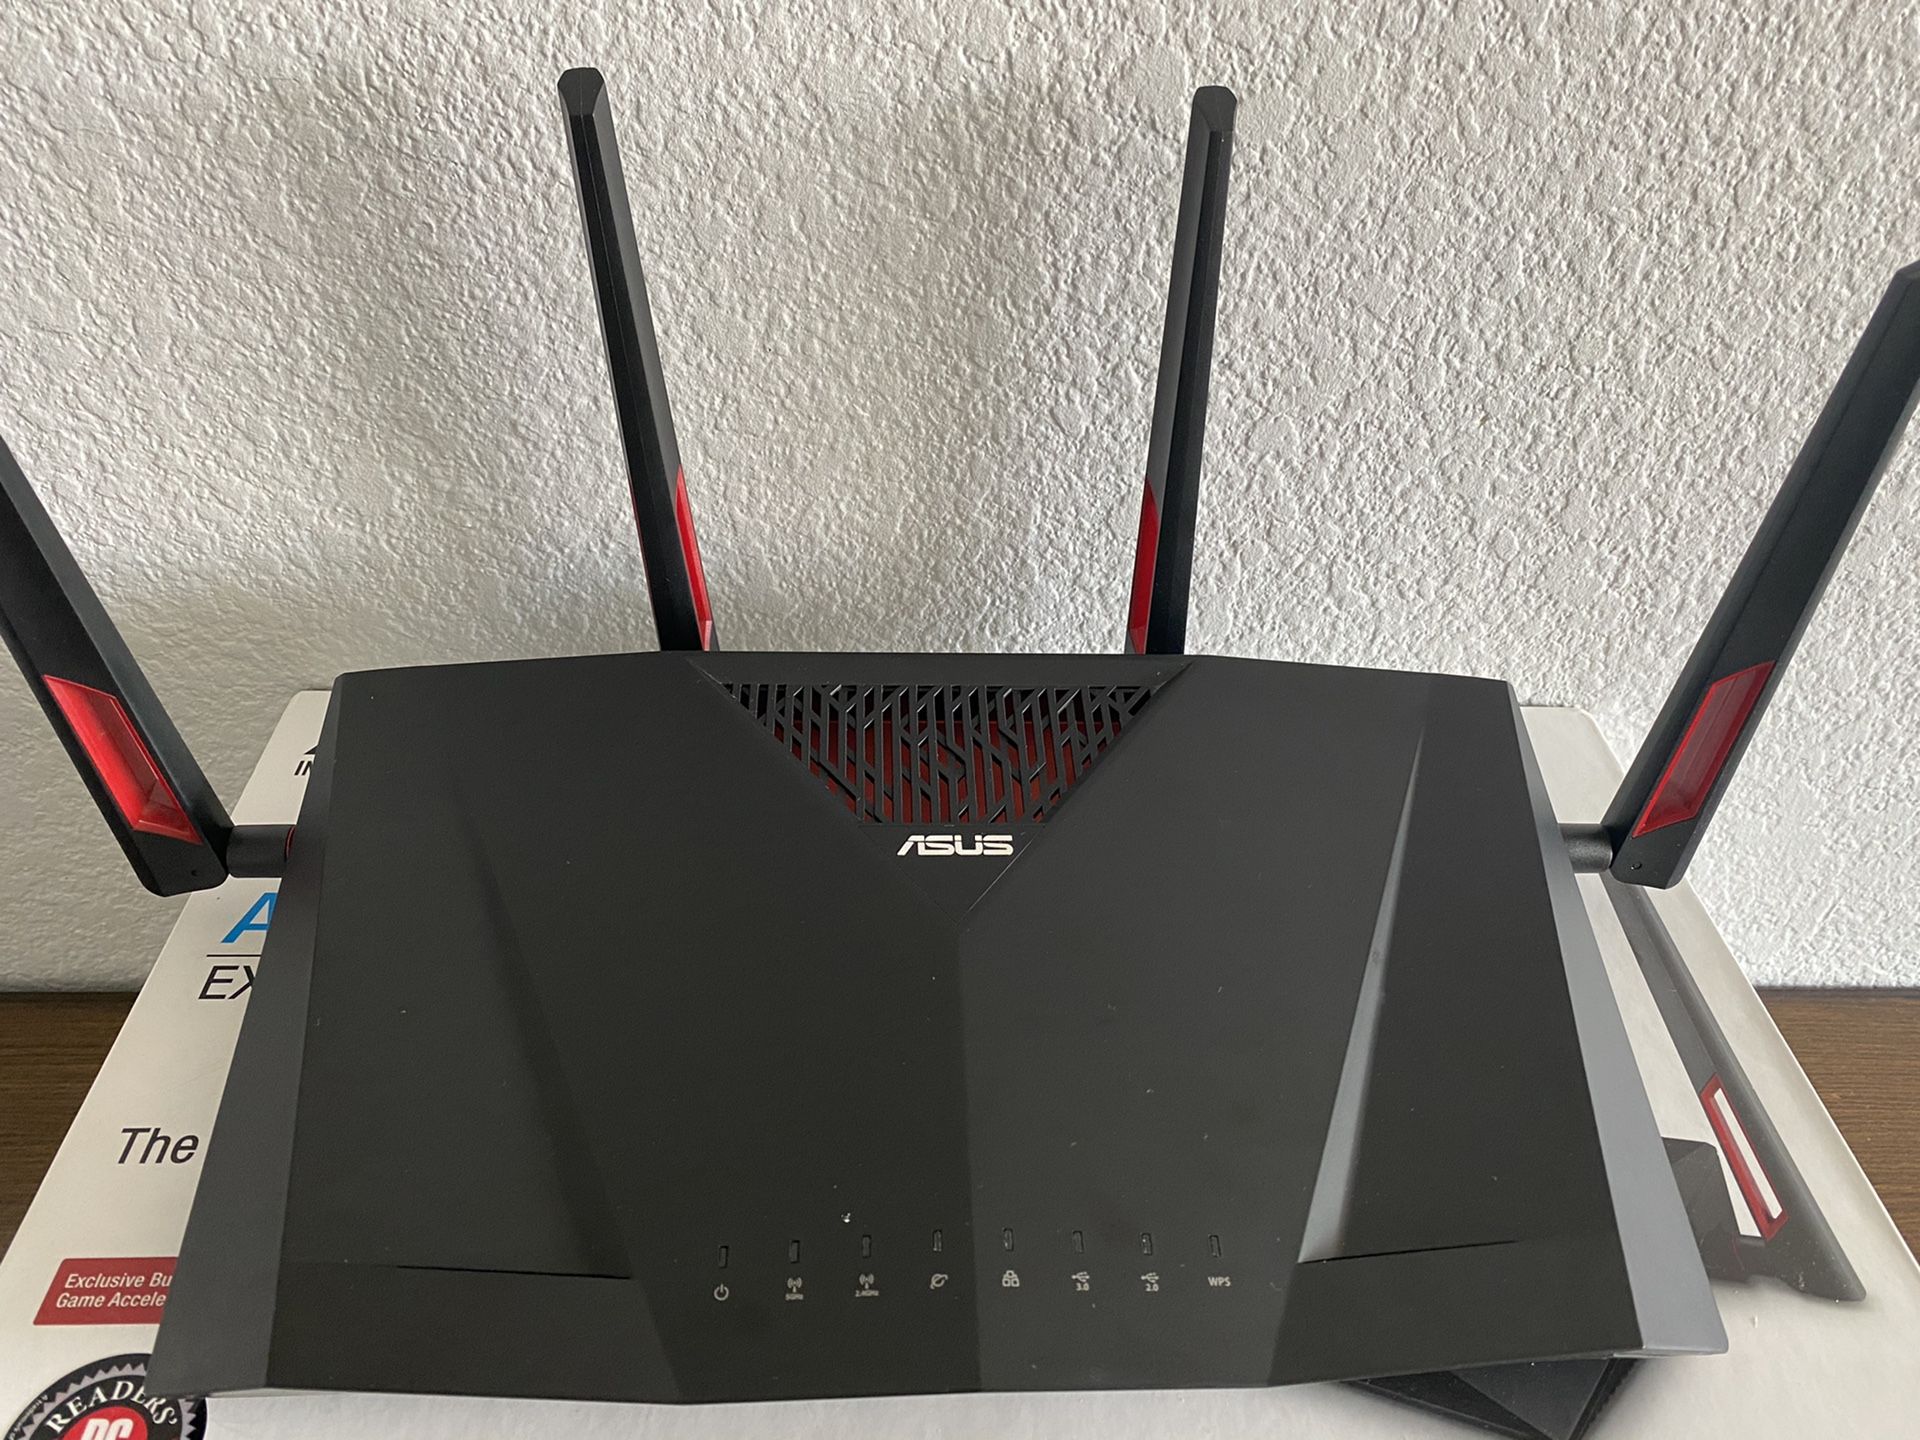 Asus AC3100 RT-AC88U extreme gaming router